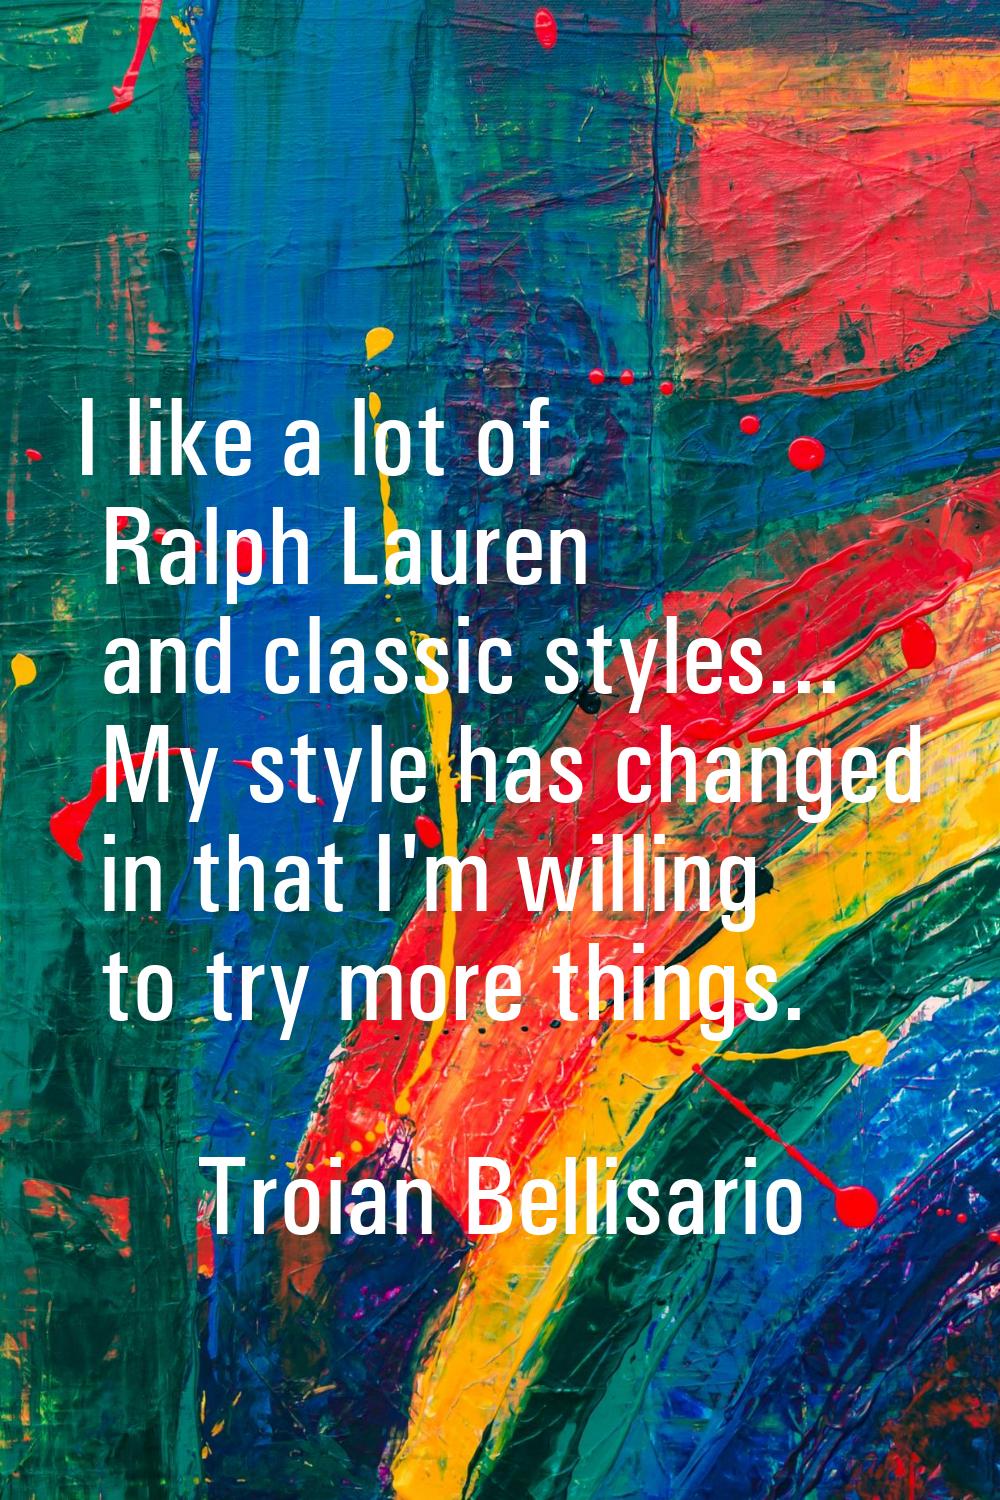 I like a lot of Ralph Lauren and classic styles... My style has changed in that I'm willing to try 